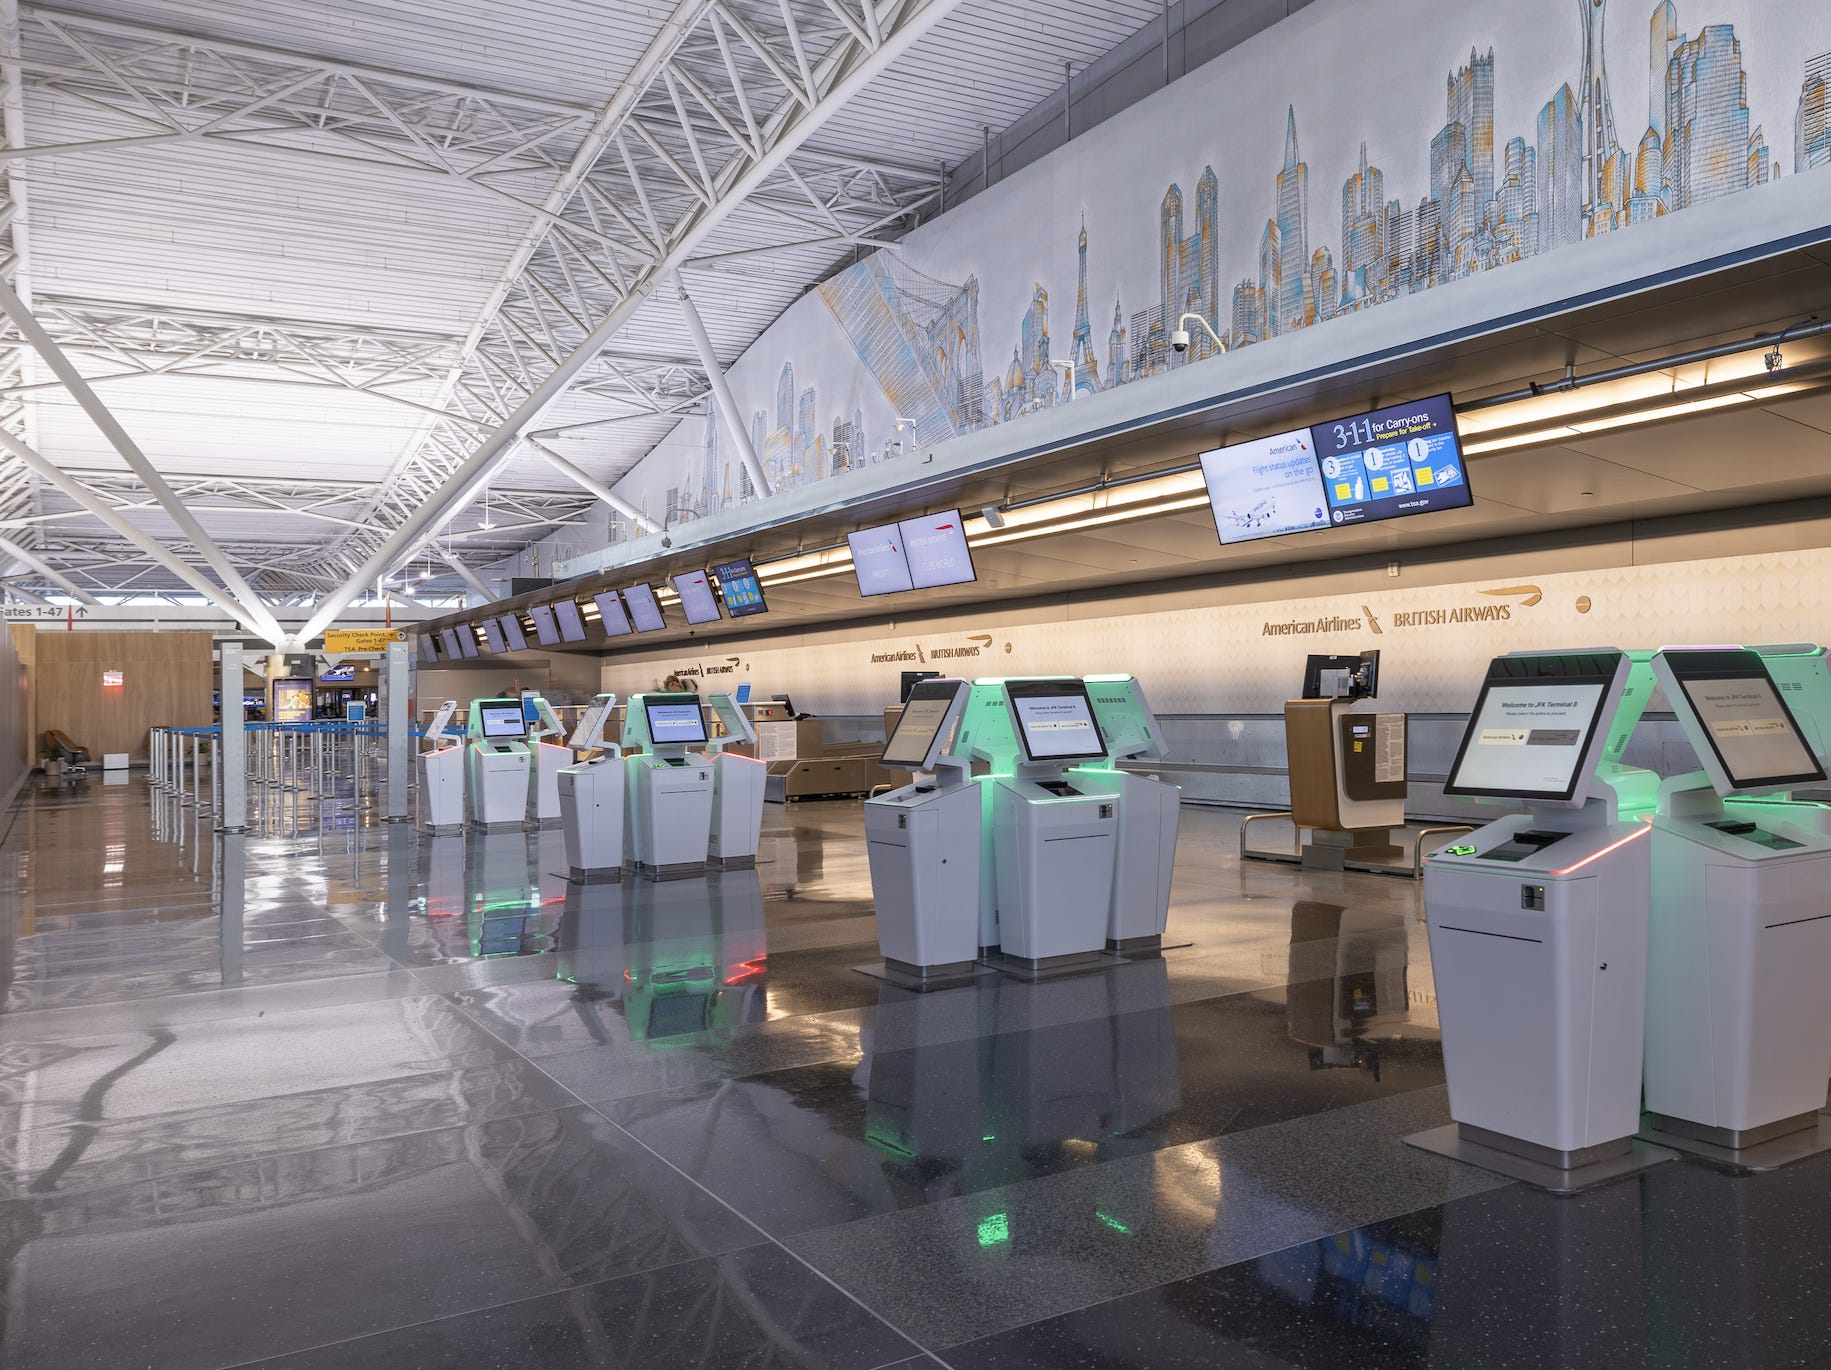 American and British Airways' premium open air check-in space.